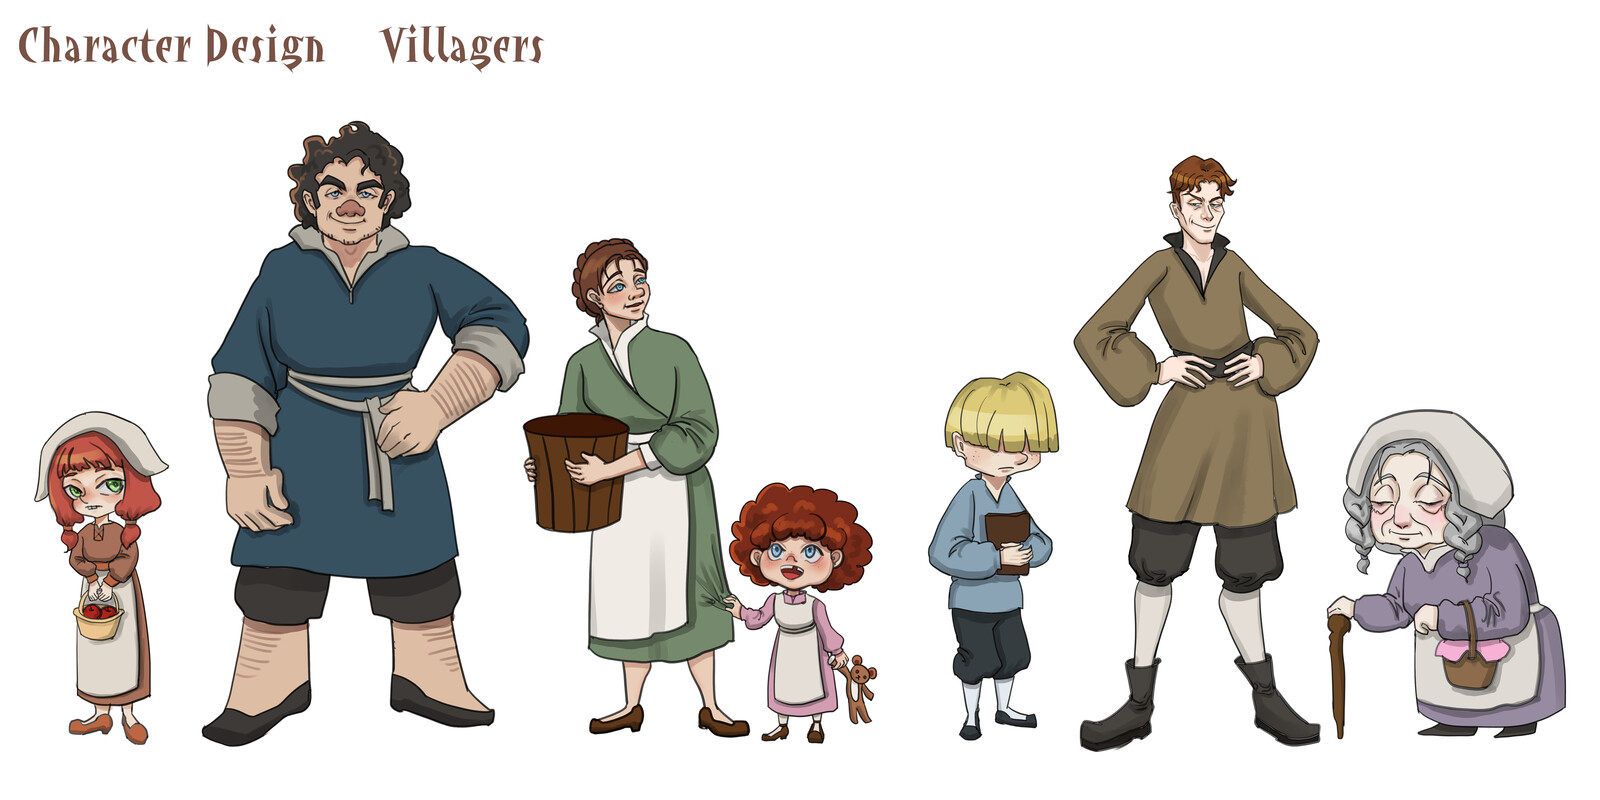 Character Design “Layla“---Villagers